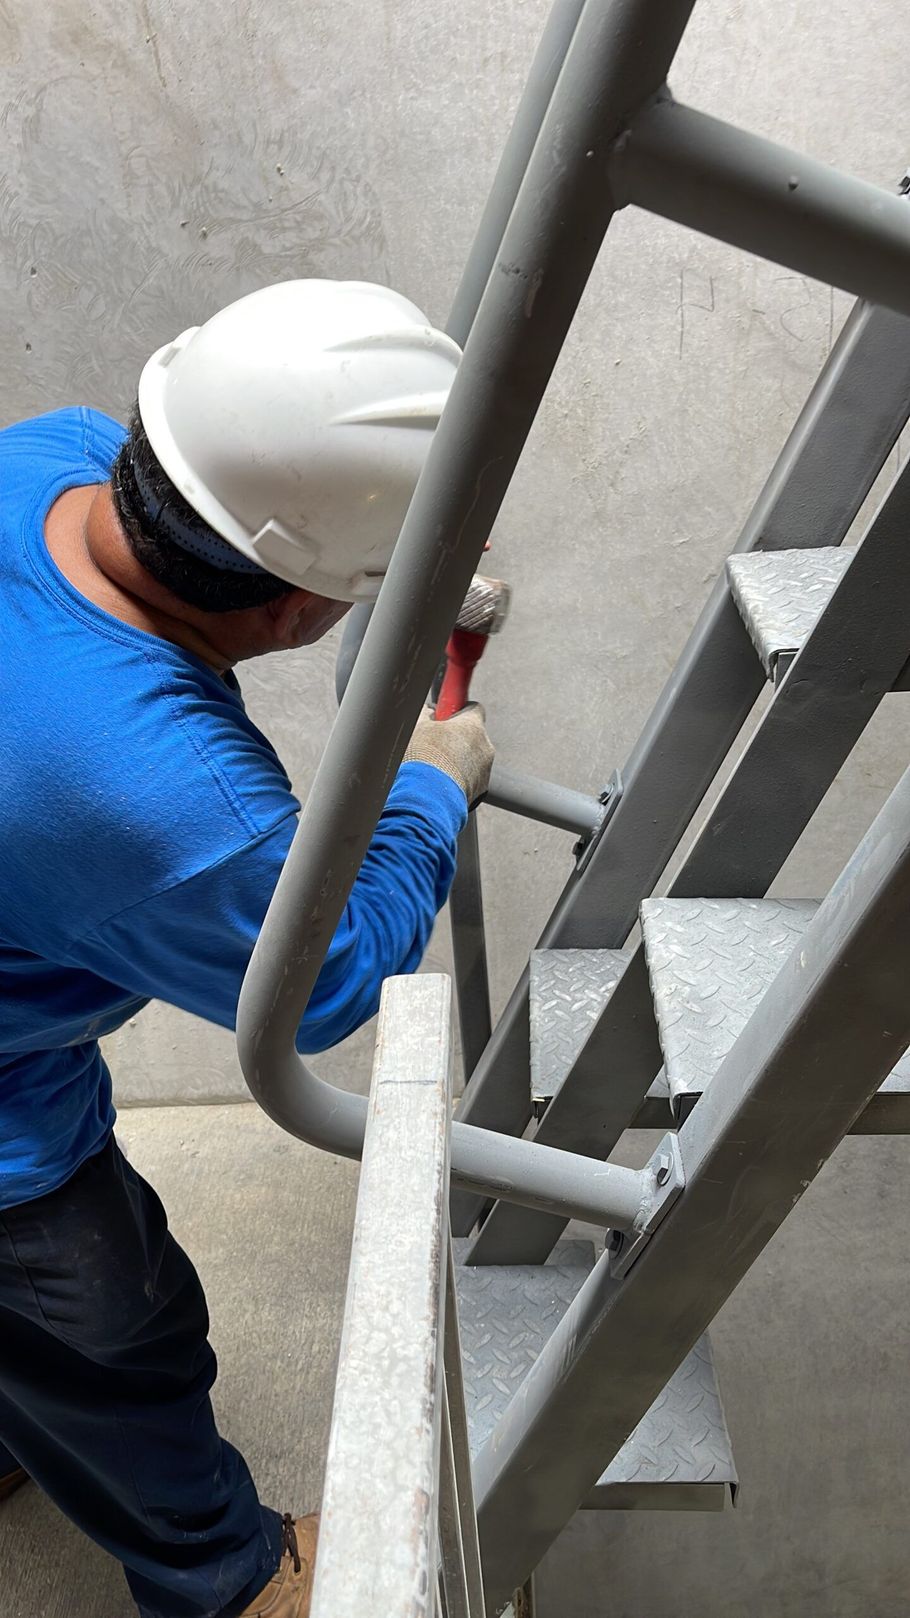 A man wearing a hard hat is working on a set of stairs